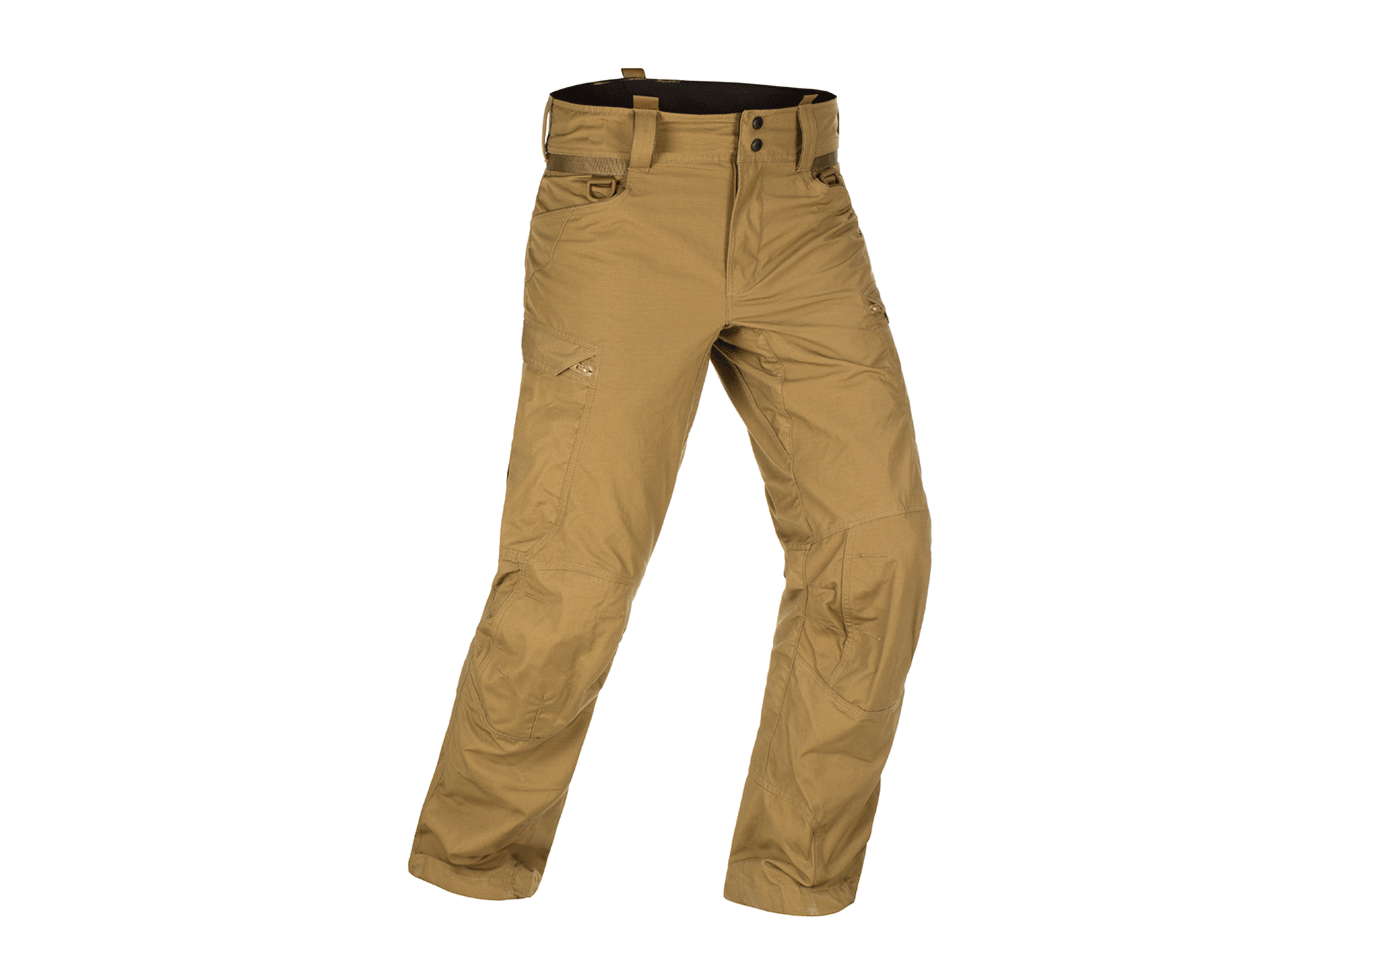 Clawgear Operator Combat Pant Coyote